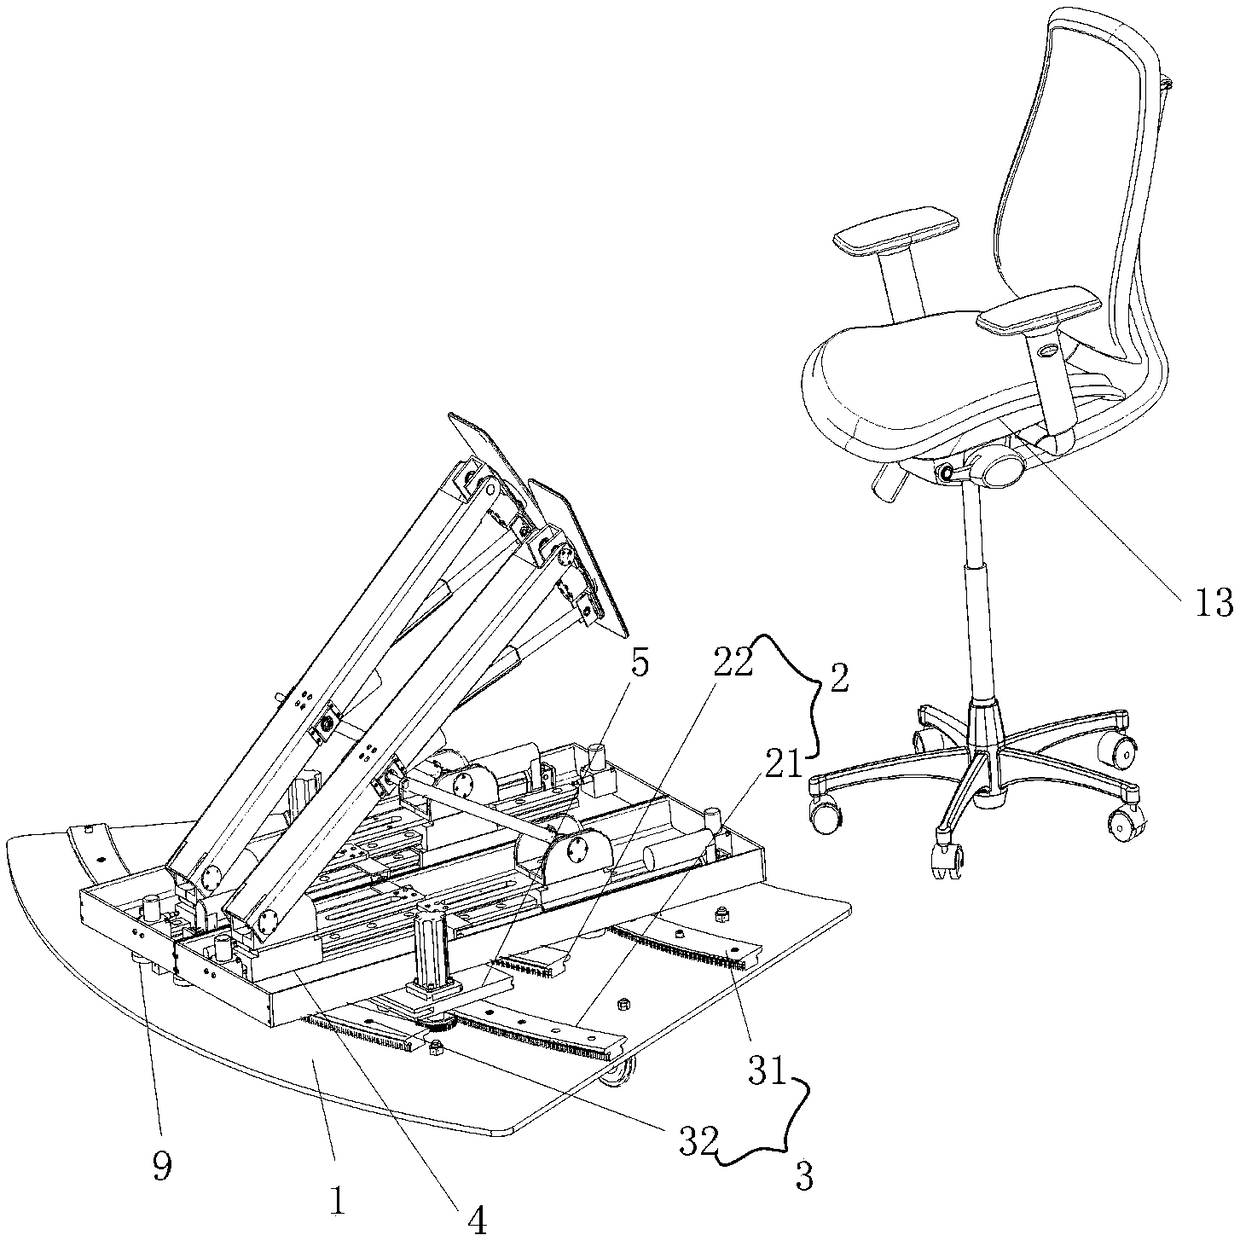 Spatial four-degree-of-freedom rehabilitation training device for lower limbs